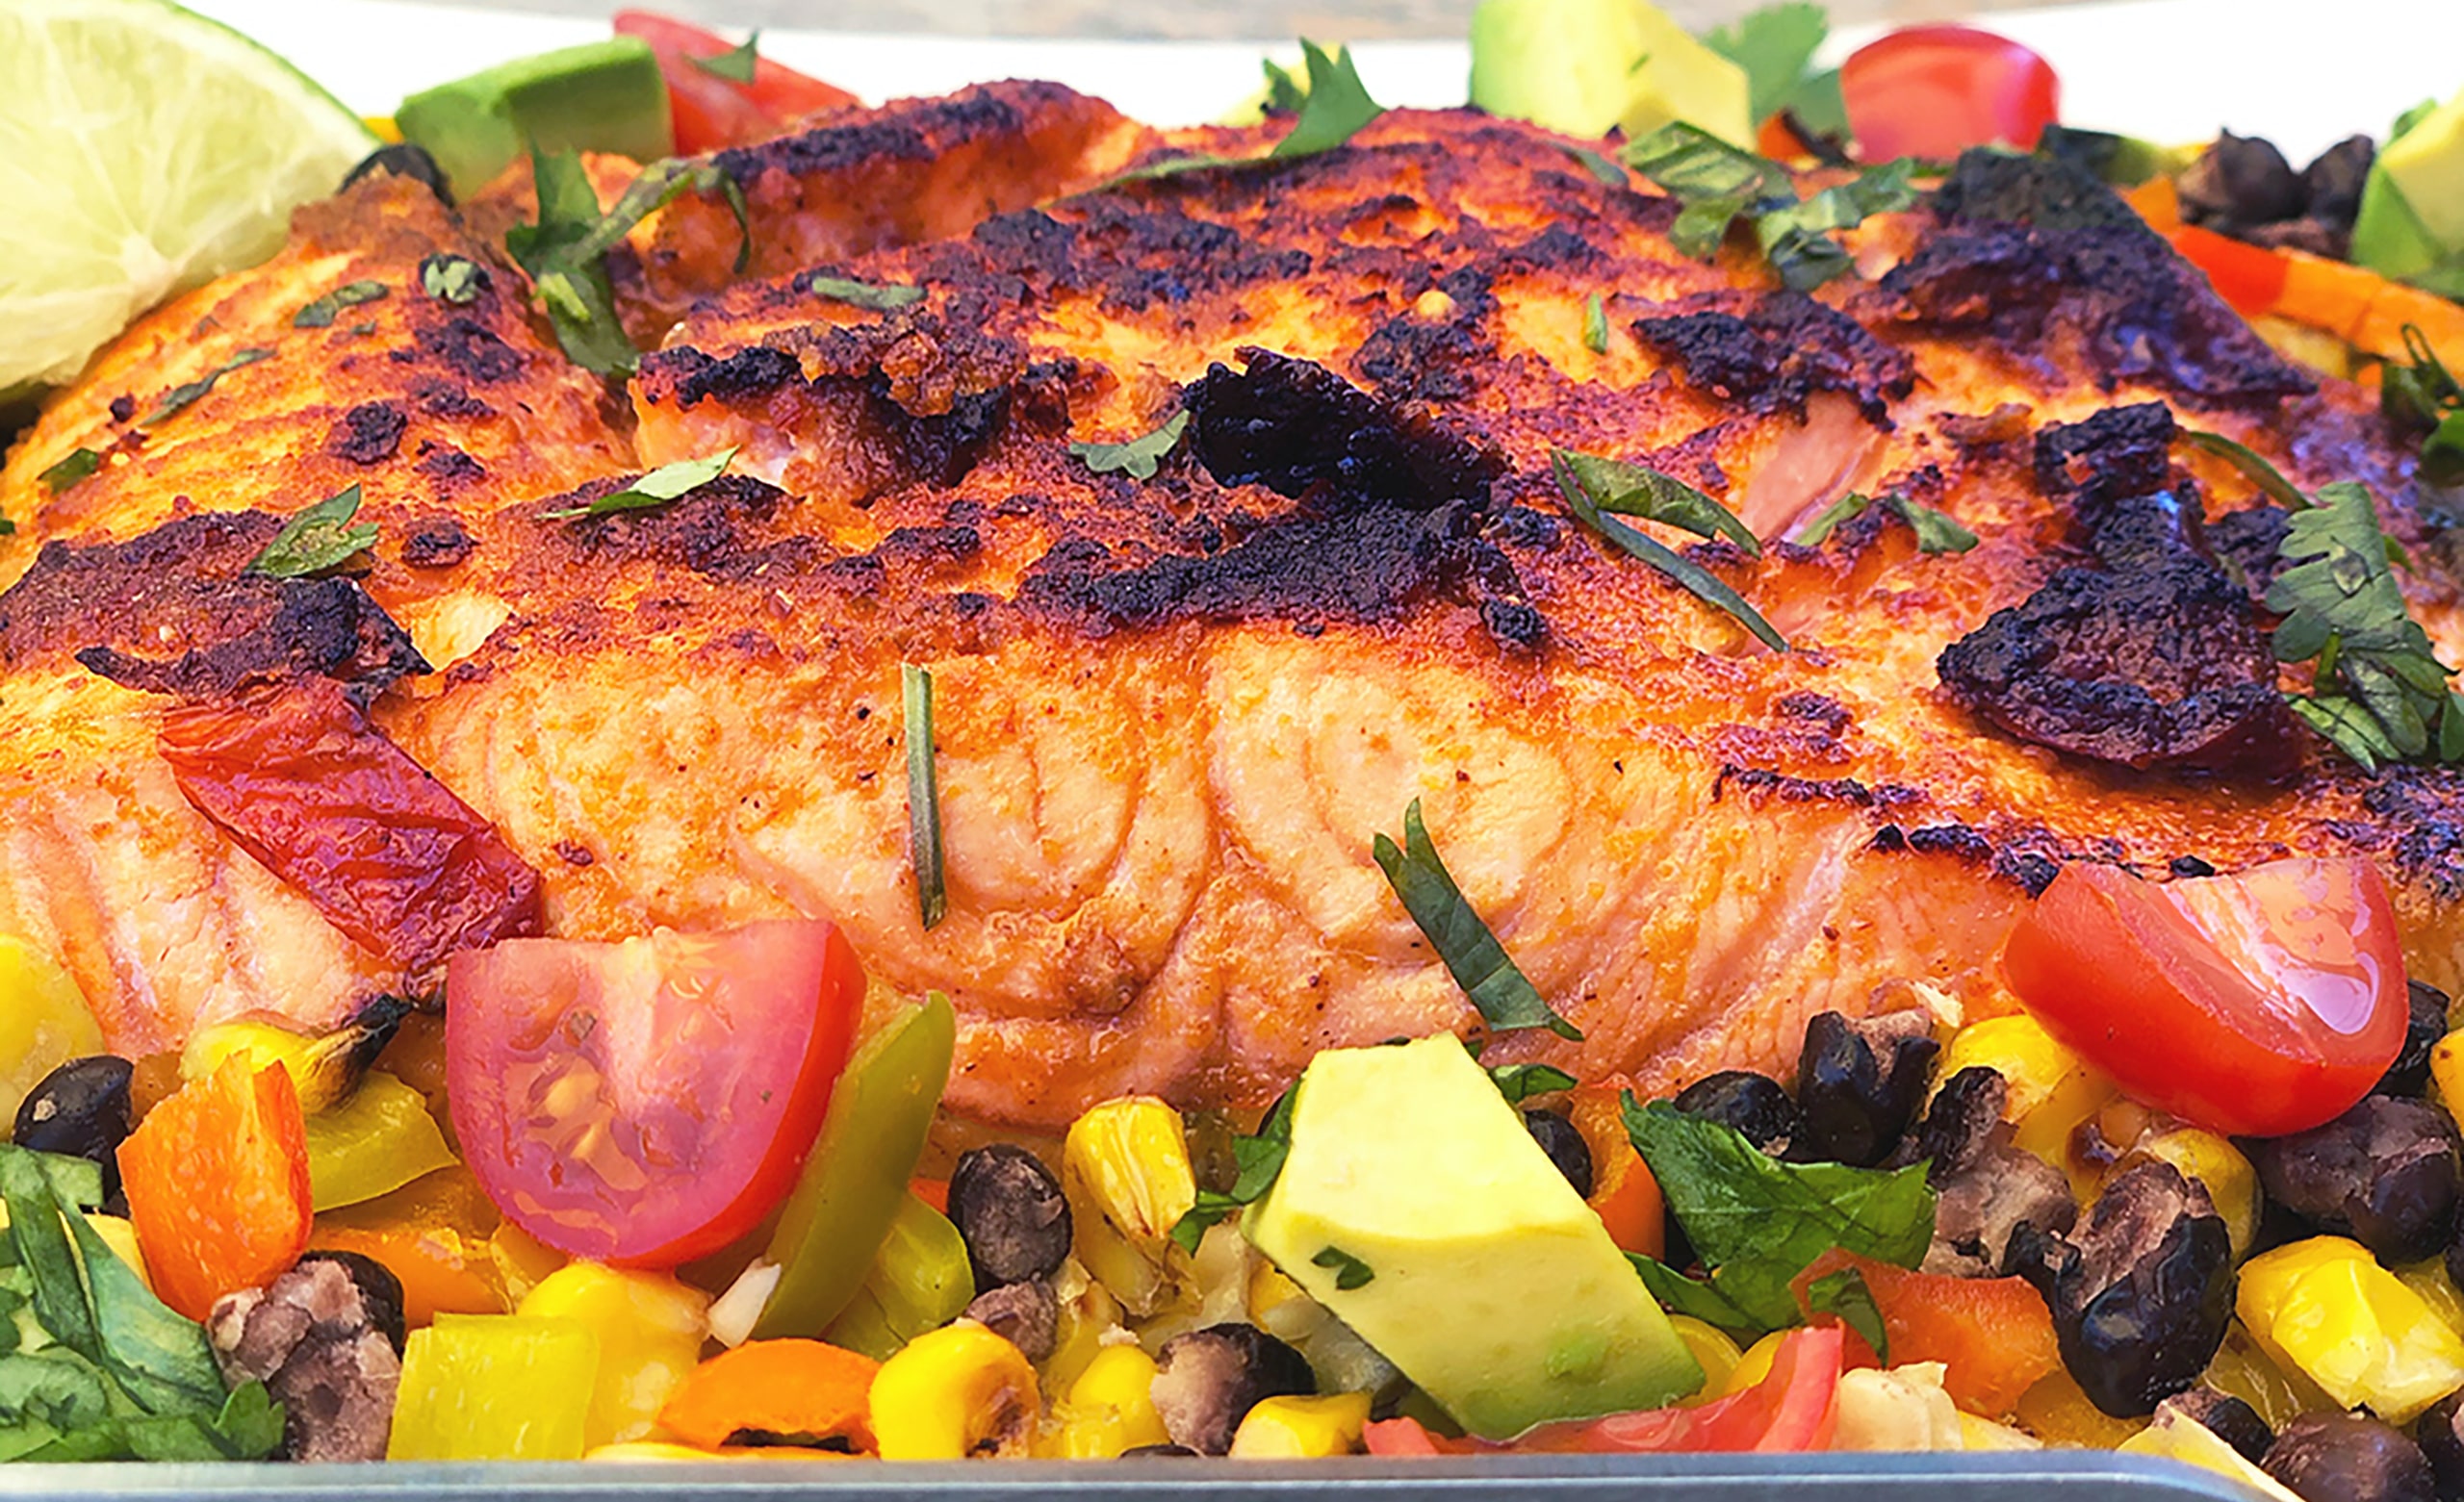 Made with a Beefer: Chipotle Lime Roasted Salmon with Charred Corn and Black Bean Relish